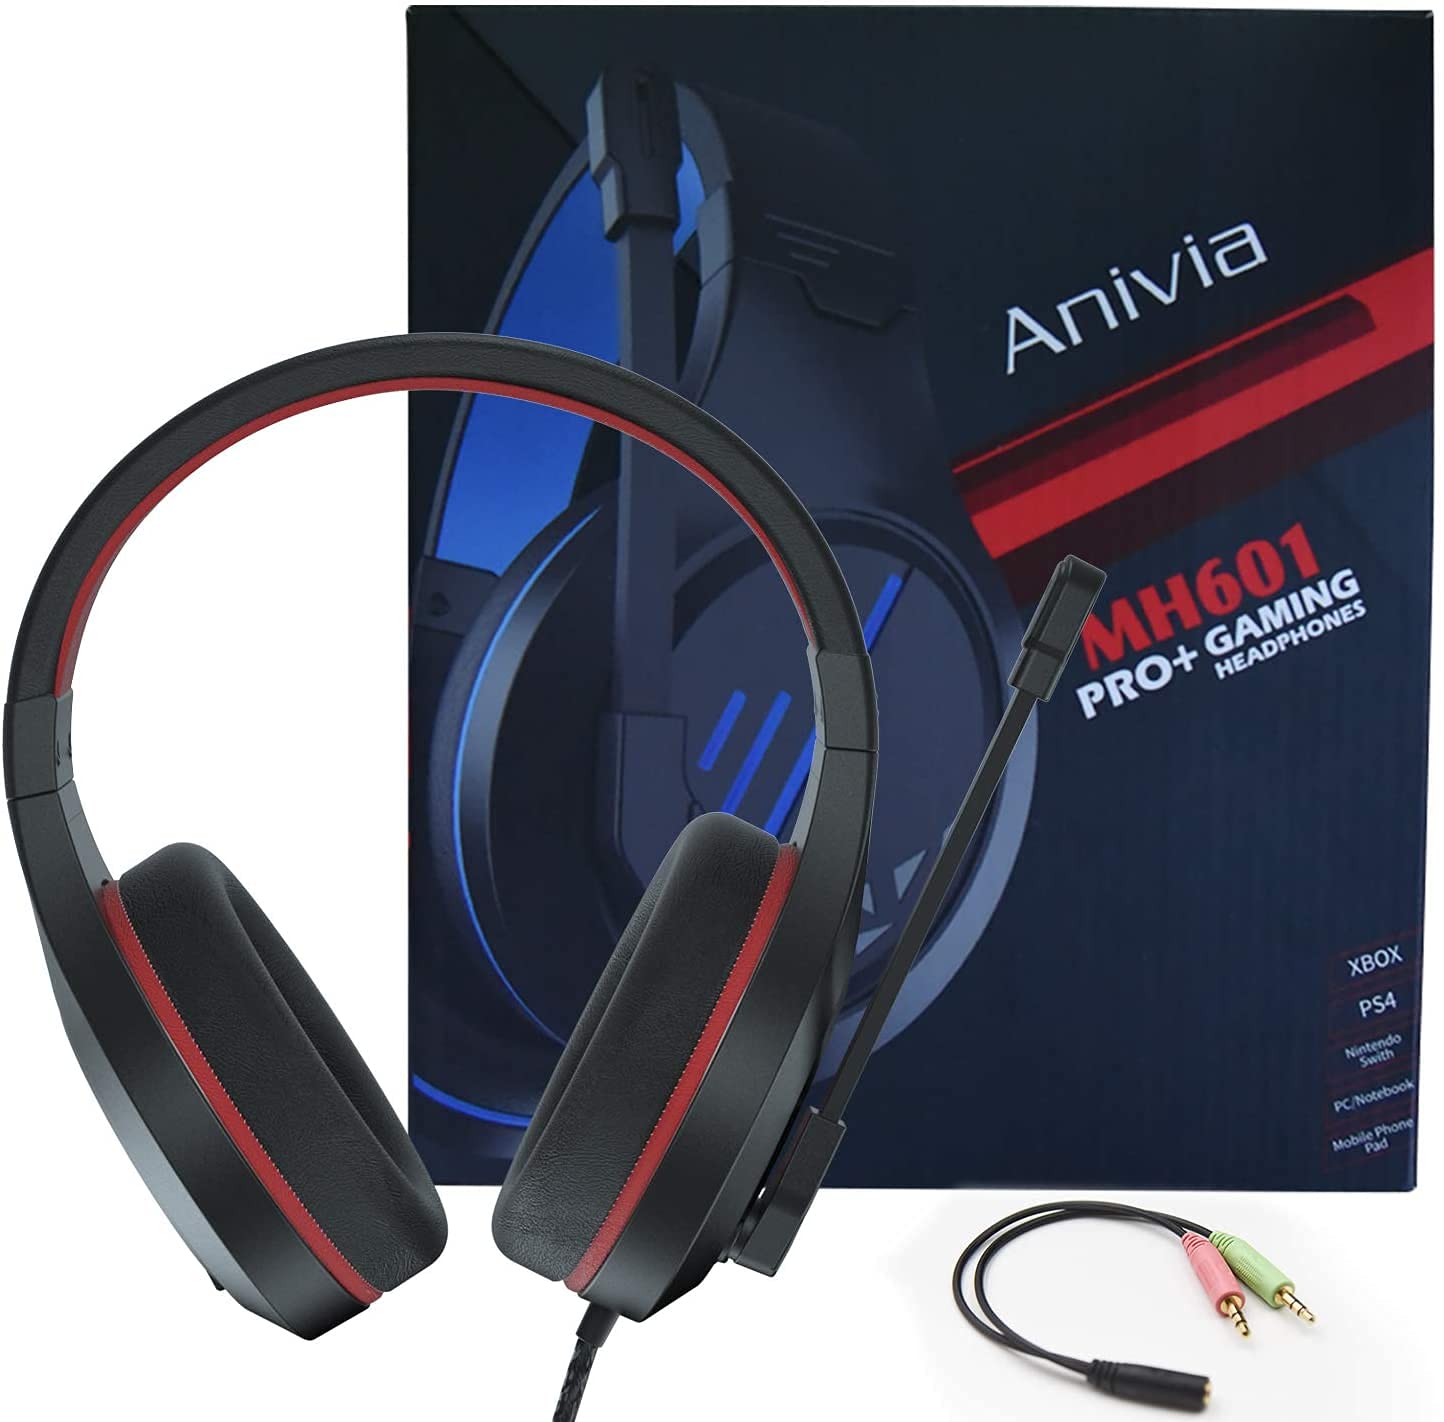 Anivia MH601 Headphones with Microphone LED Wired Headset with Active Noise Canceling Microphone, 3.5mm Audio Jack Stereo Headphone - Red (Game/Work/School)